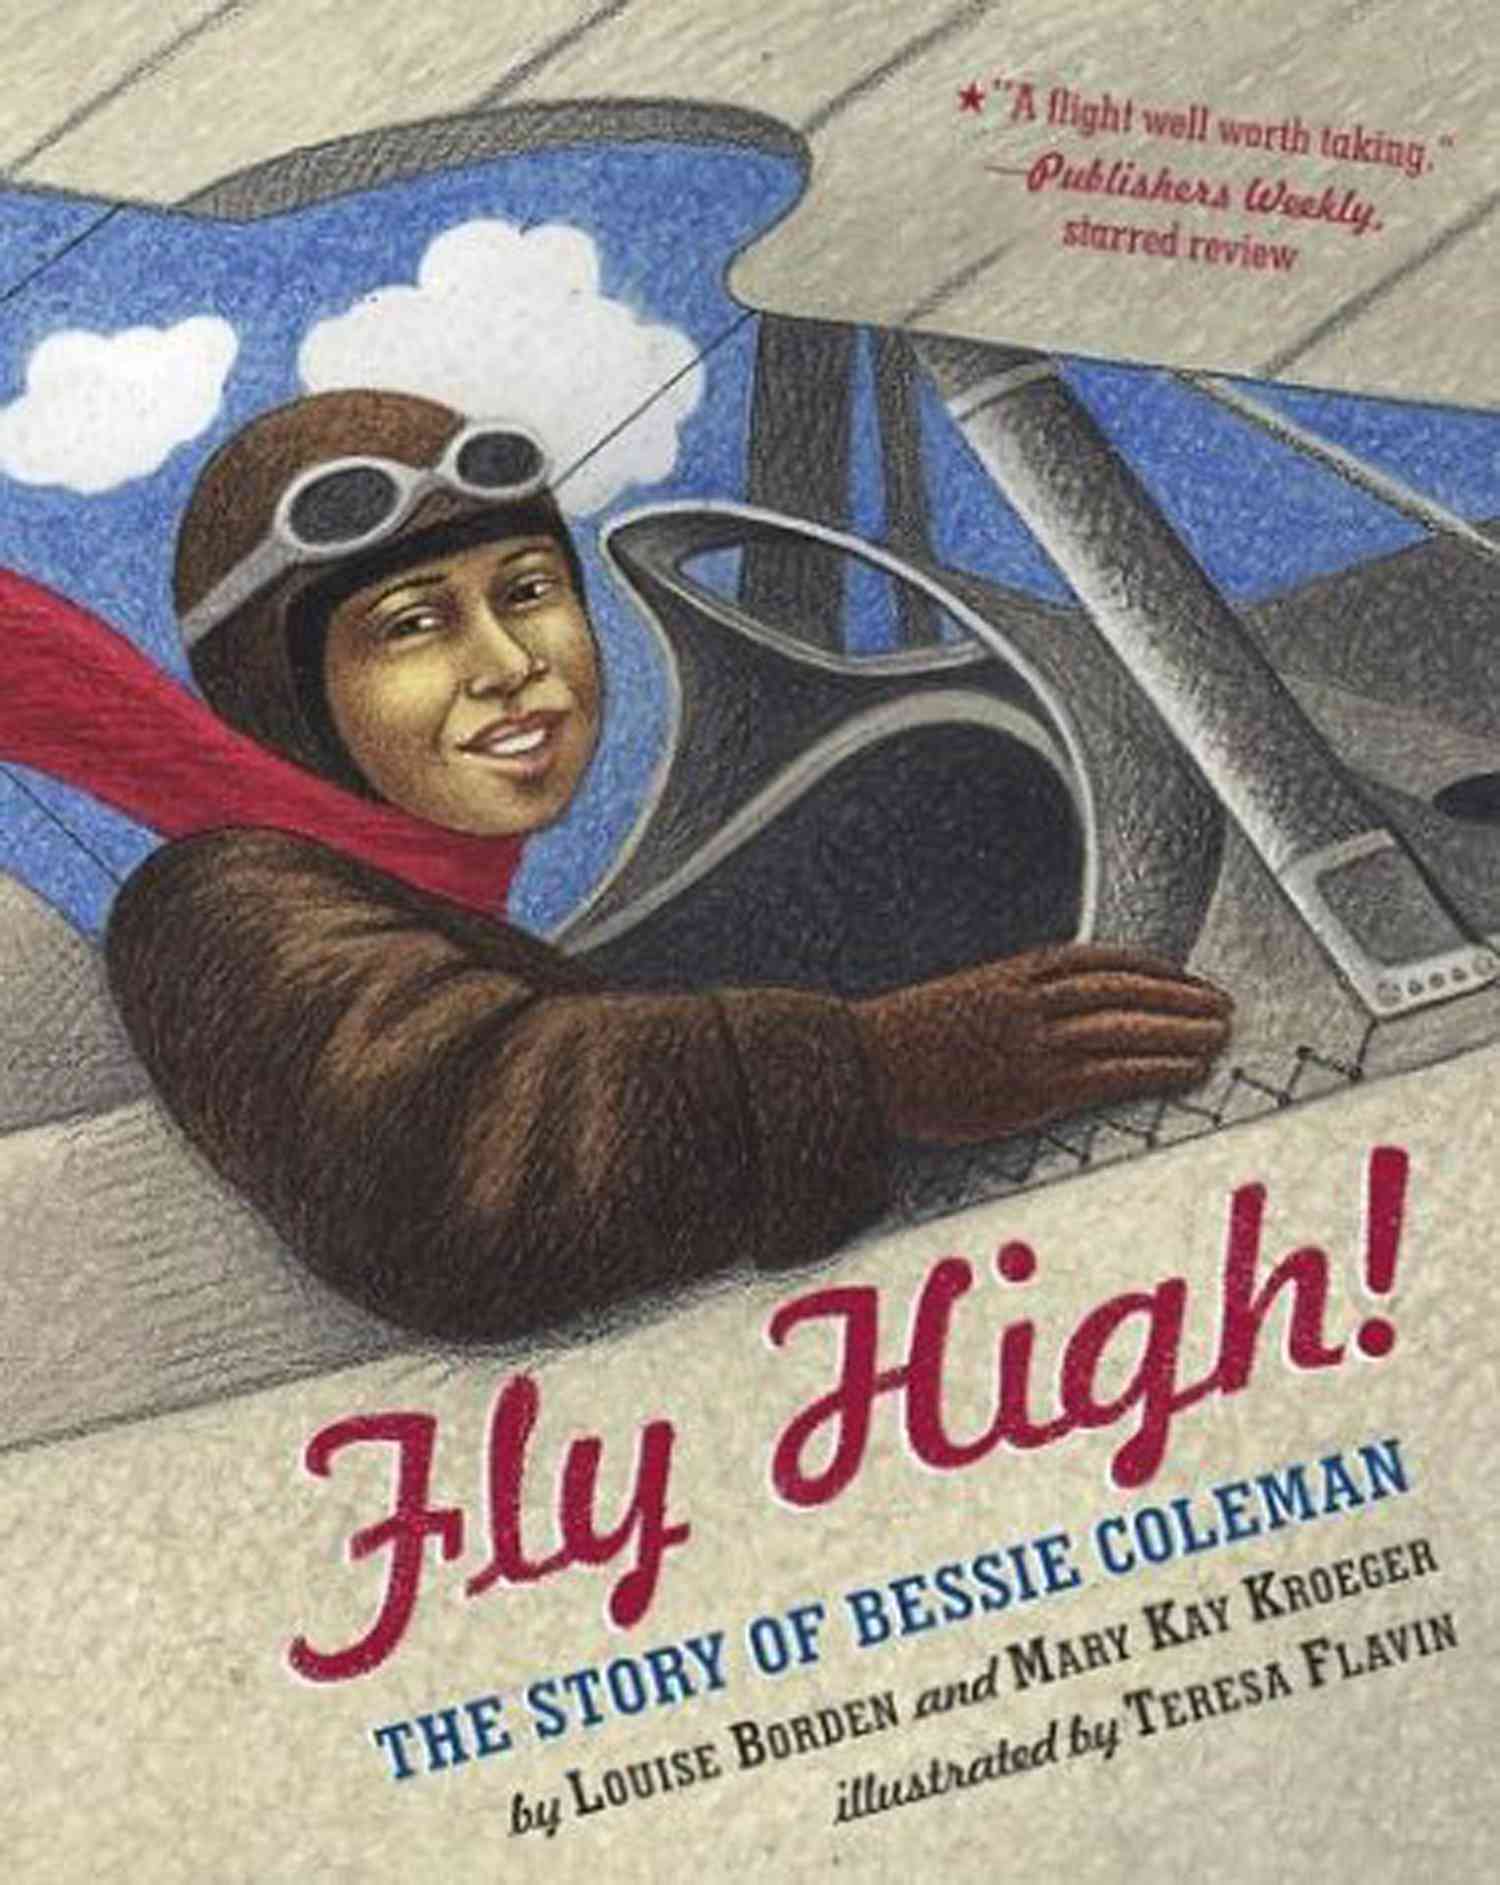 7 of 33 Fly High!: The Story of Bessie Coleman